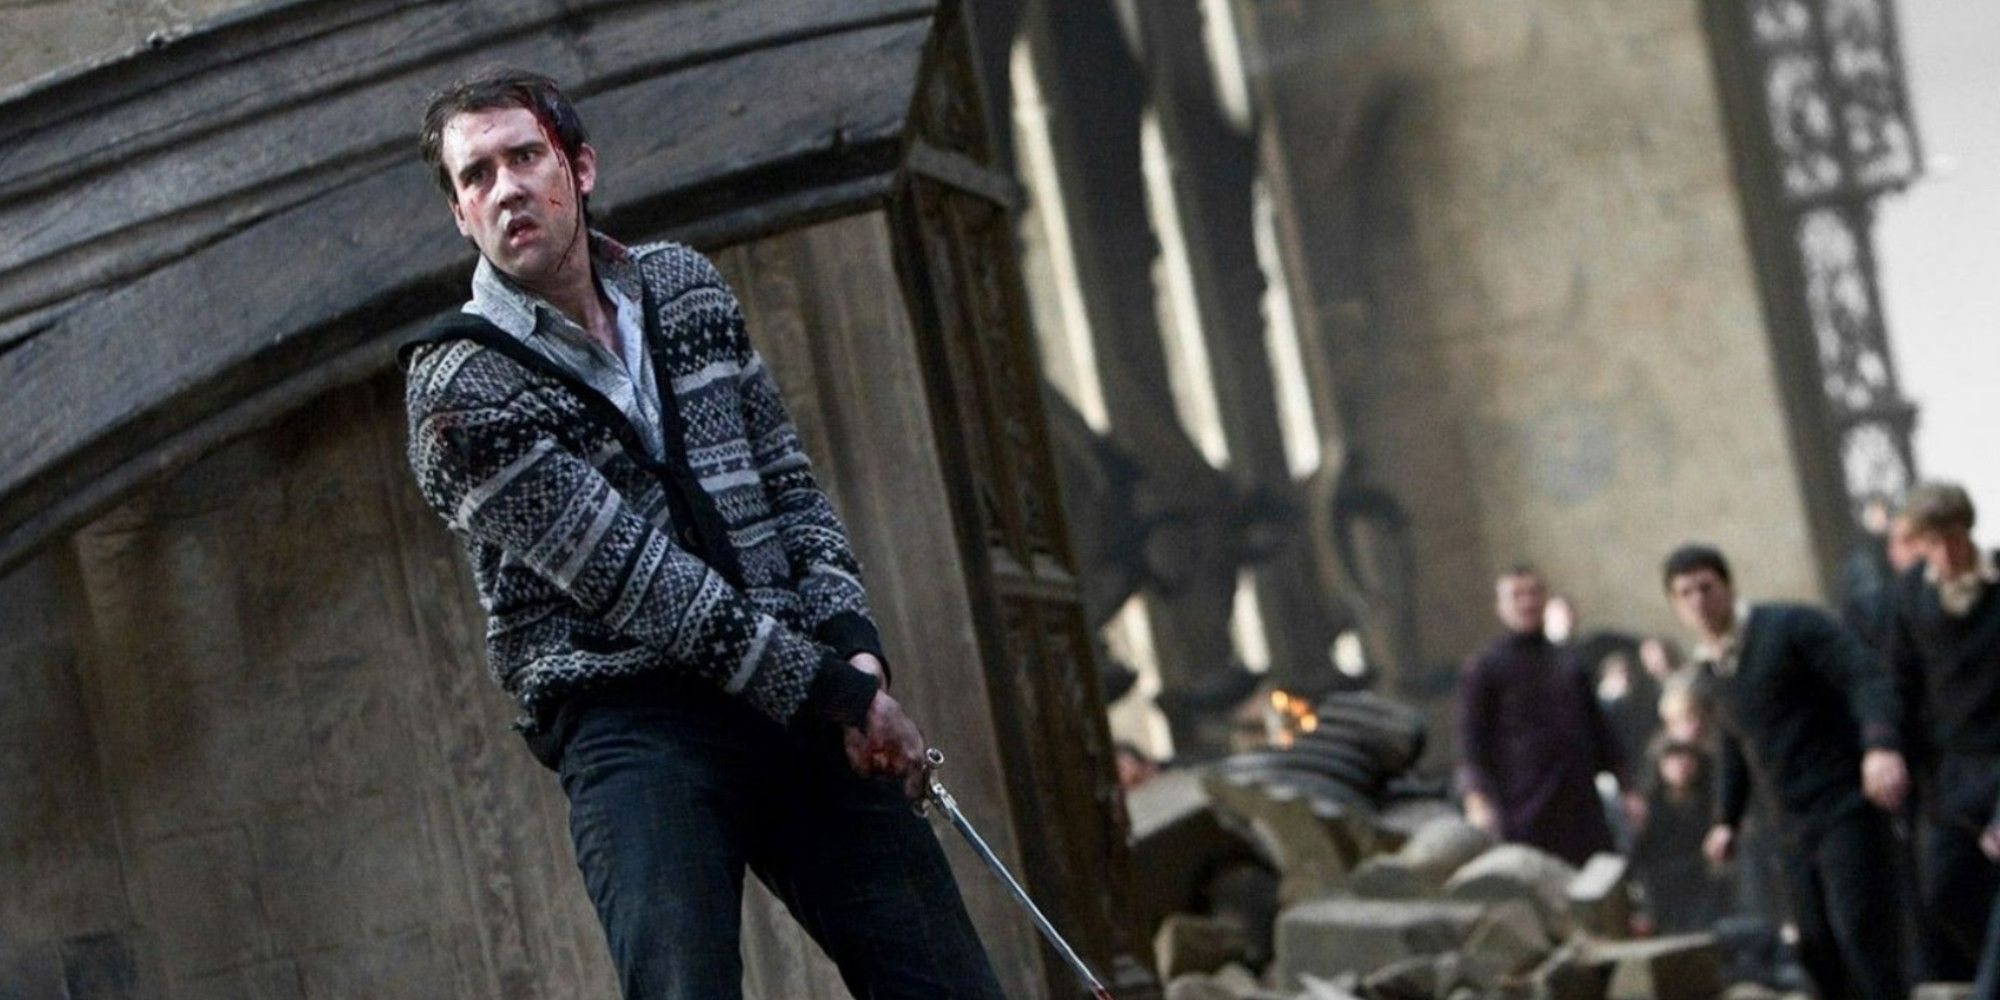 Harry Potter Ways Neville Longbottom Could Be The Perfect Chosen One Neville and the Sword of Gryffindor